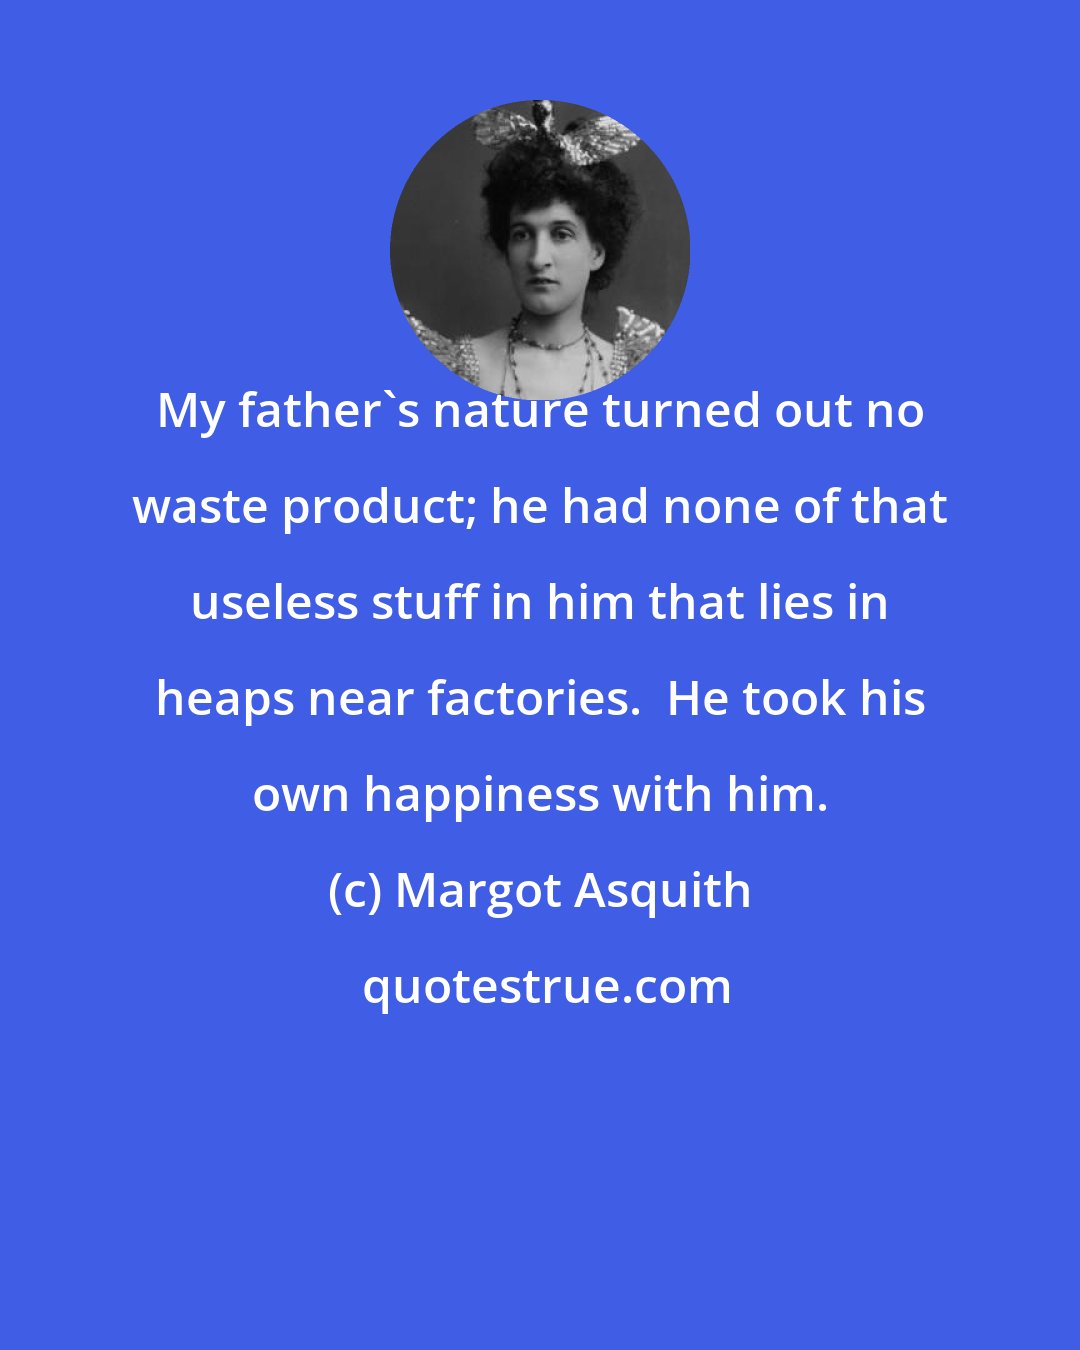 Margot Asquith: My father's nature turned out no waste product; he had none of that useless stuff in him that lies in heaps near factories.  He took his own happiness with him.